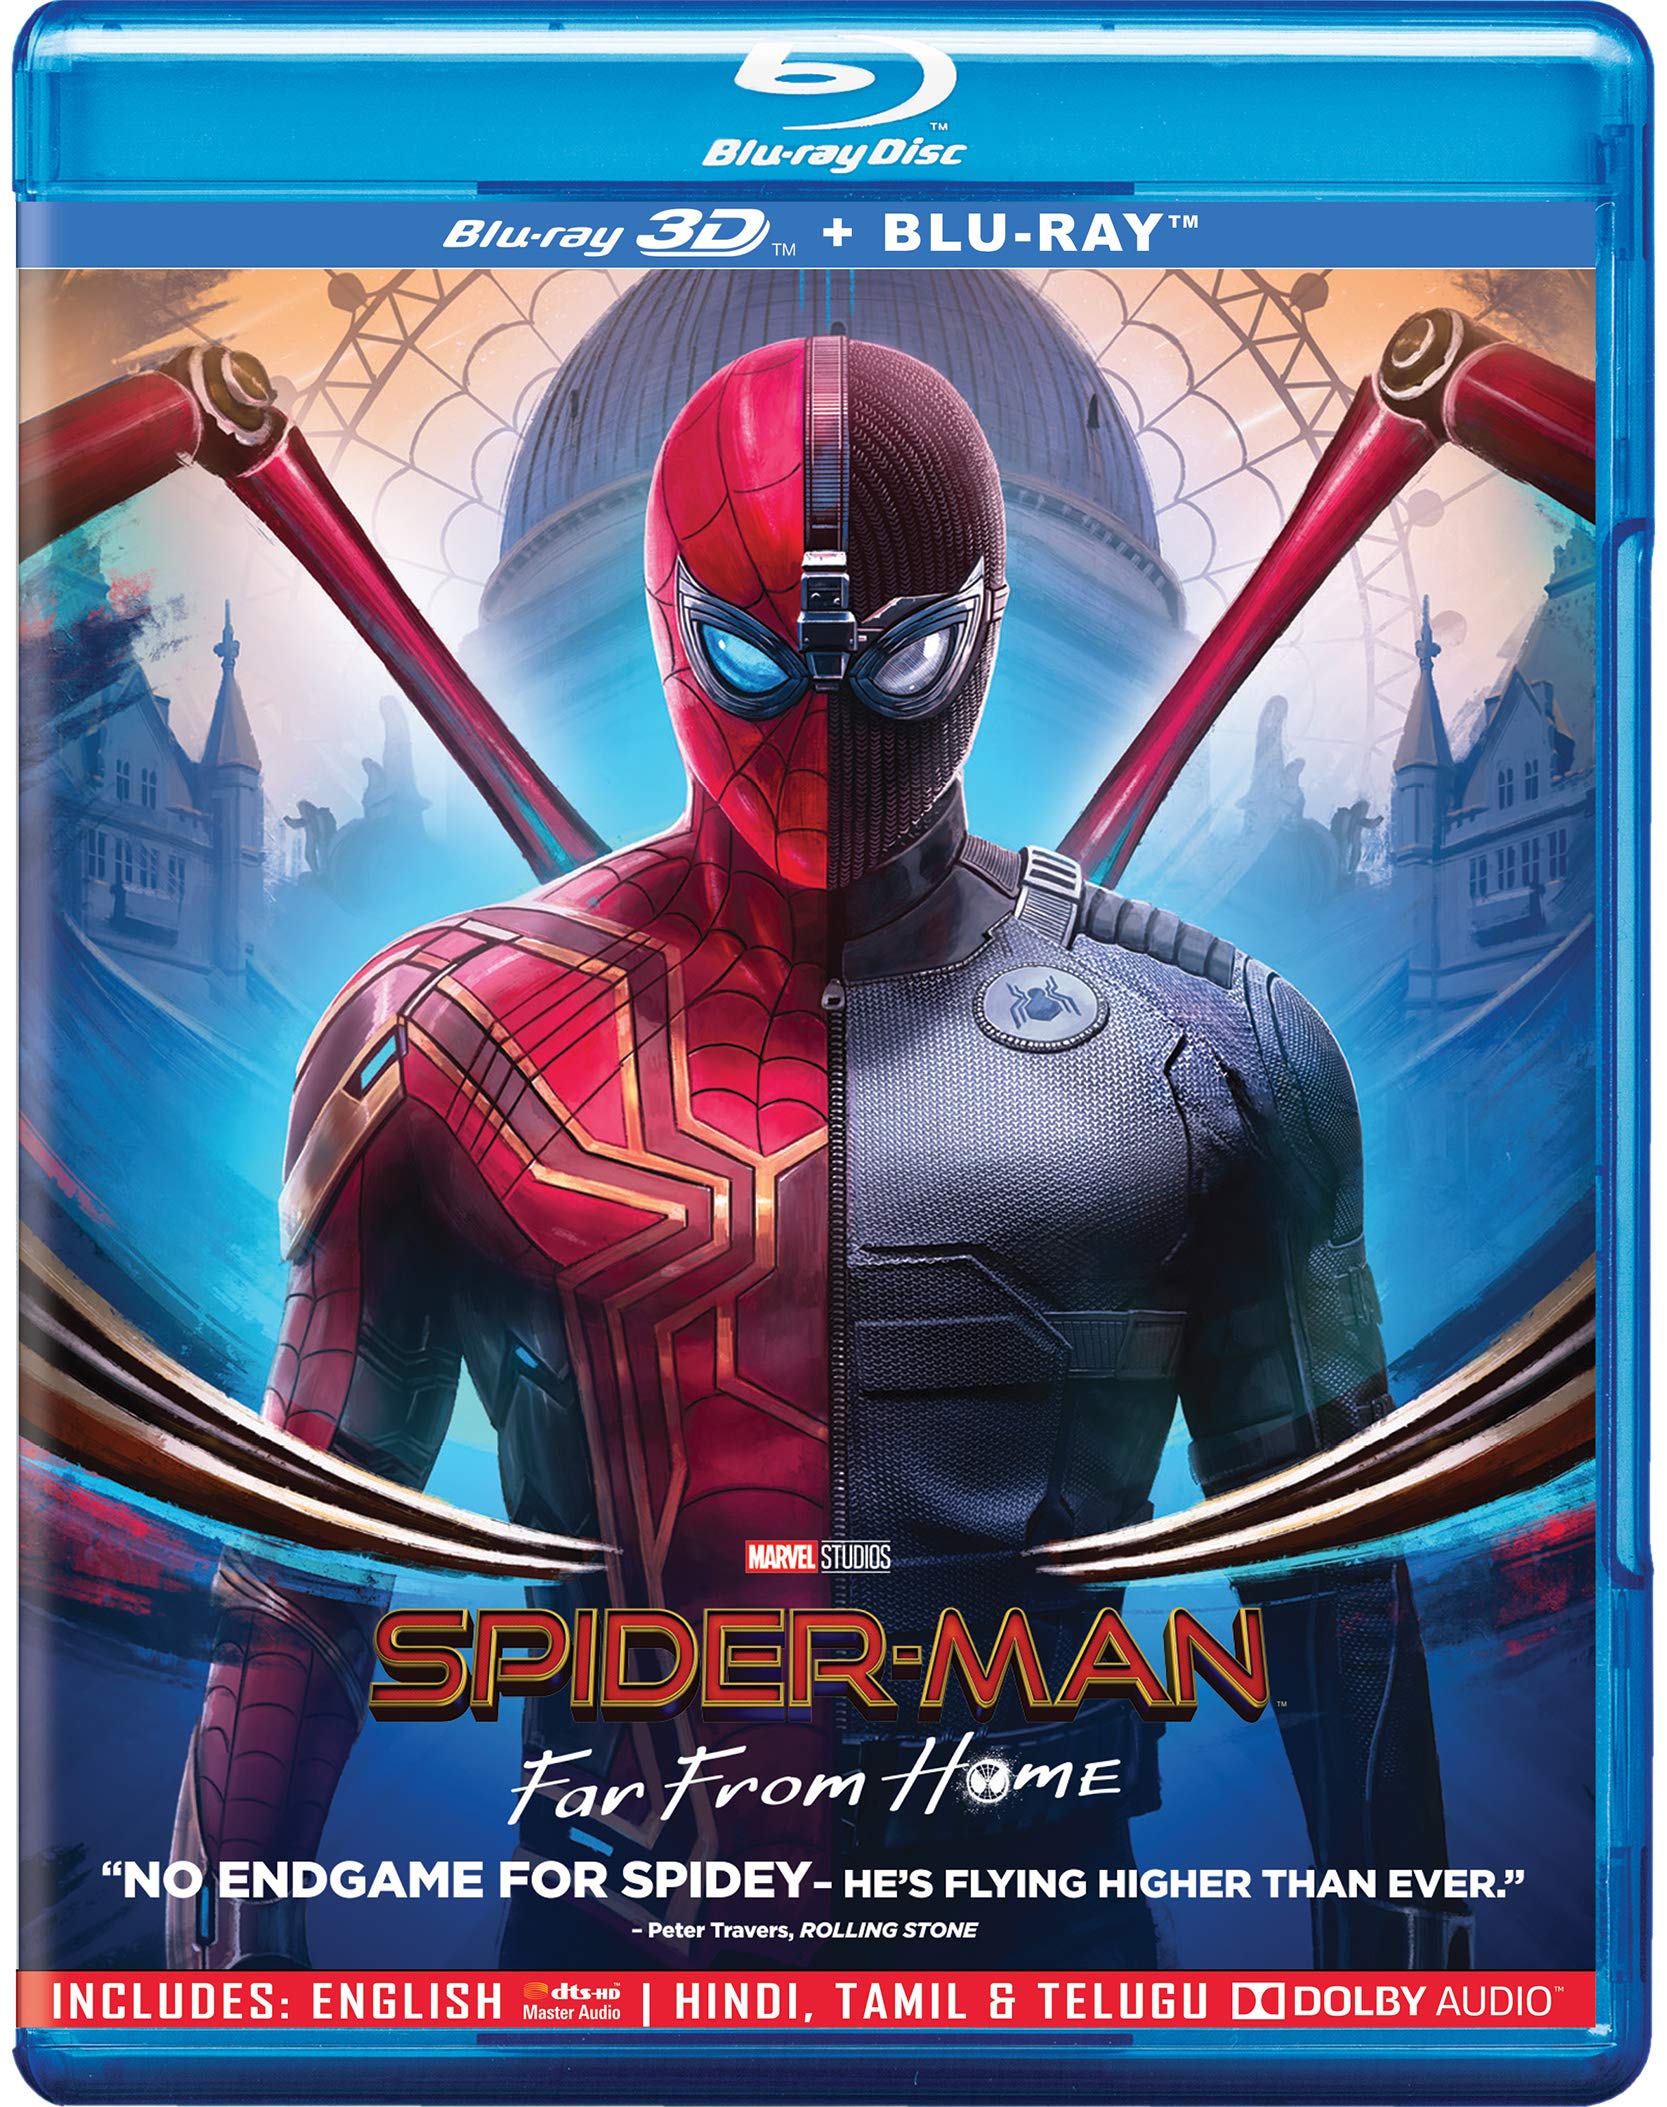 spider-man-far-from-home-blu-ray-3d-blu-ray-2-disc-movie-purcha